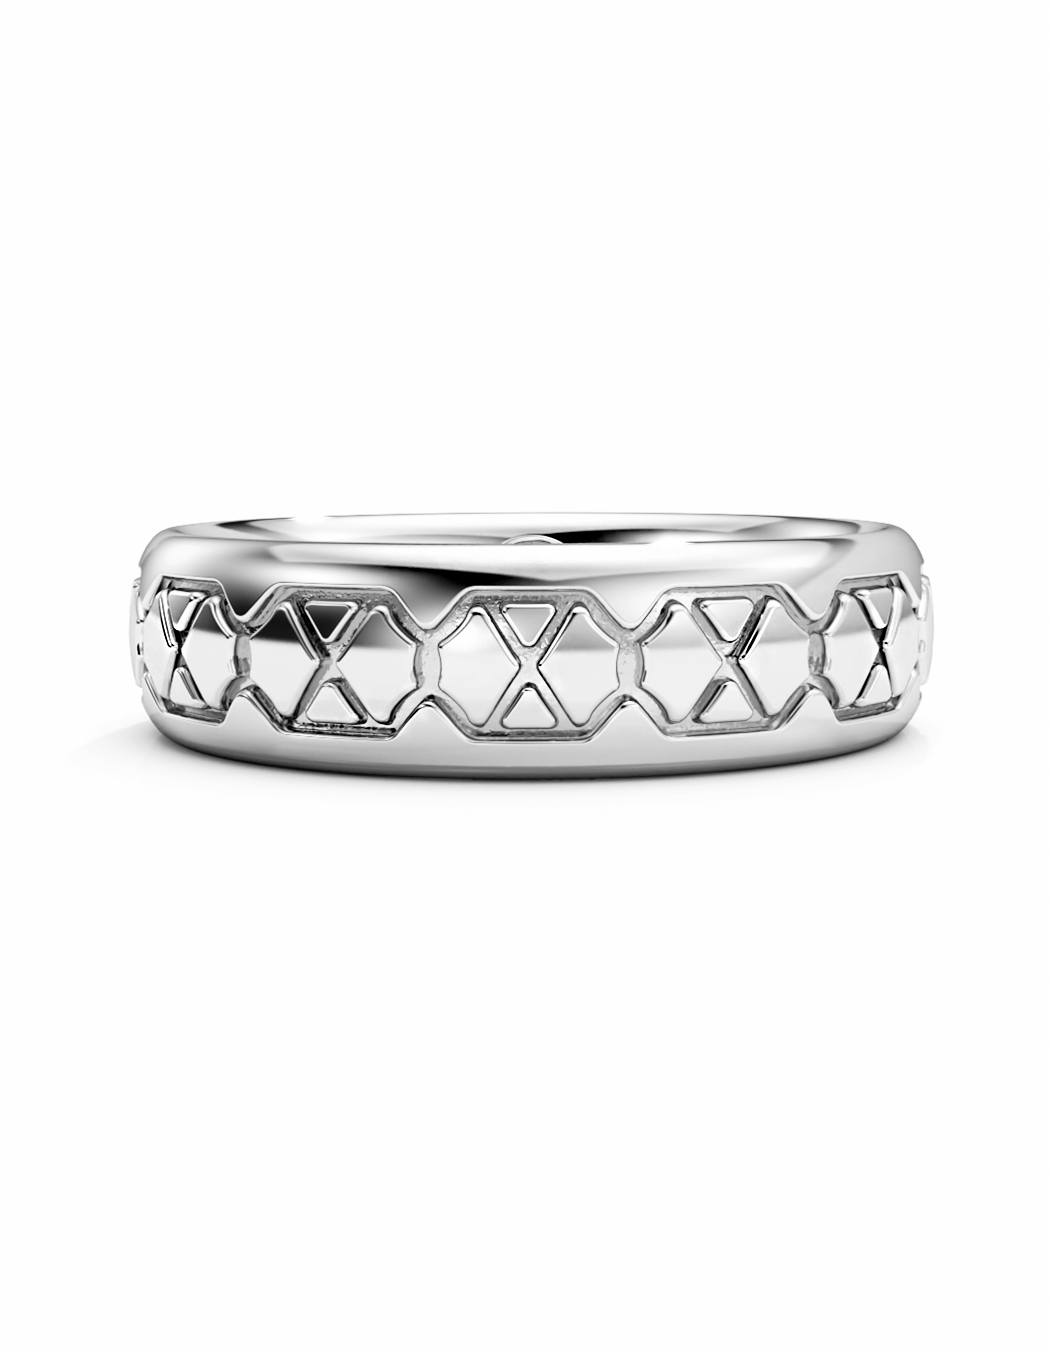 Reflections Ring - 6mm width